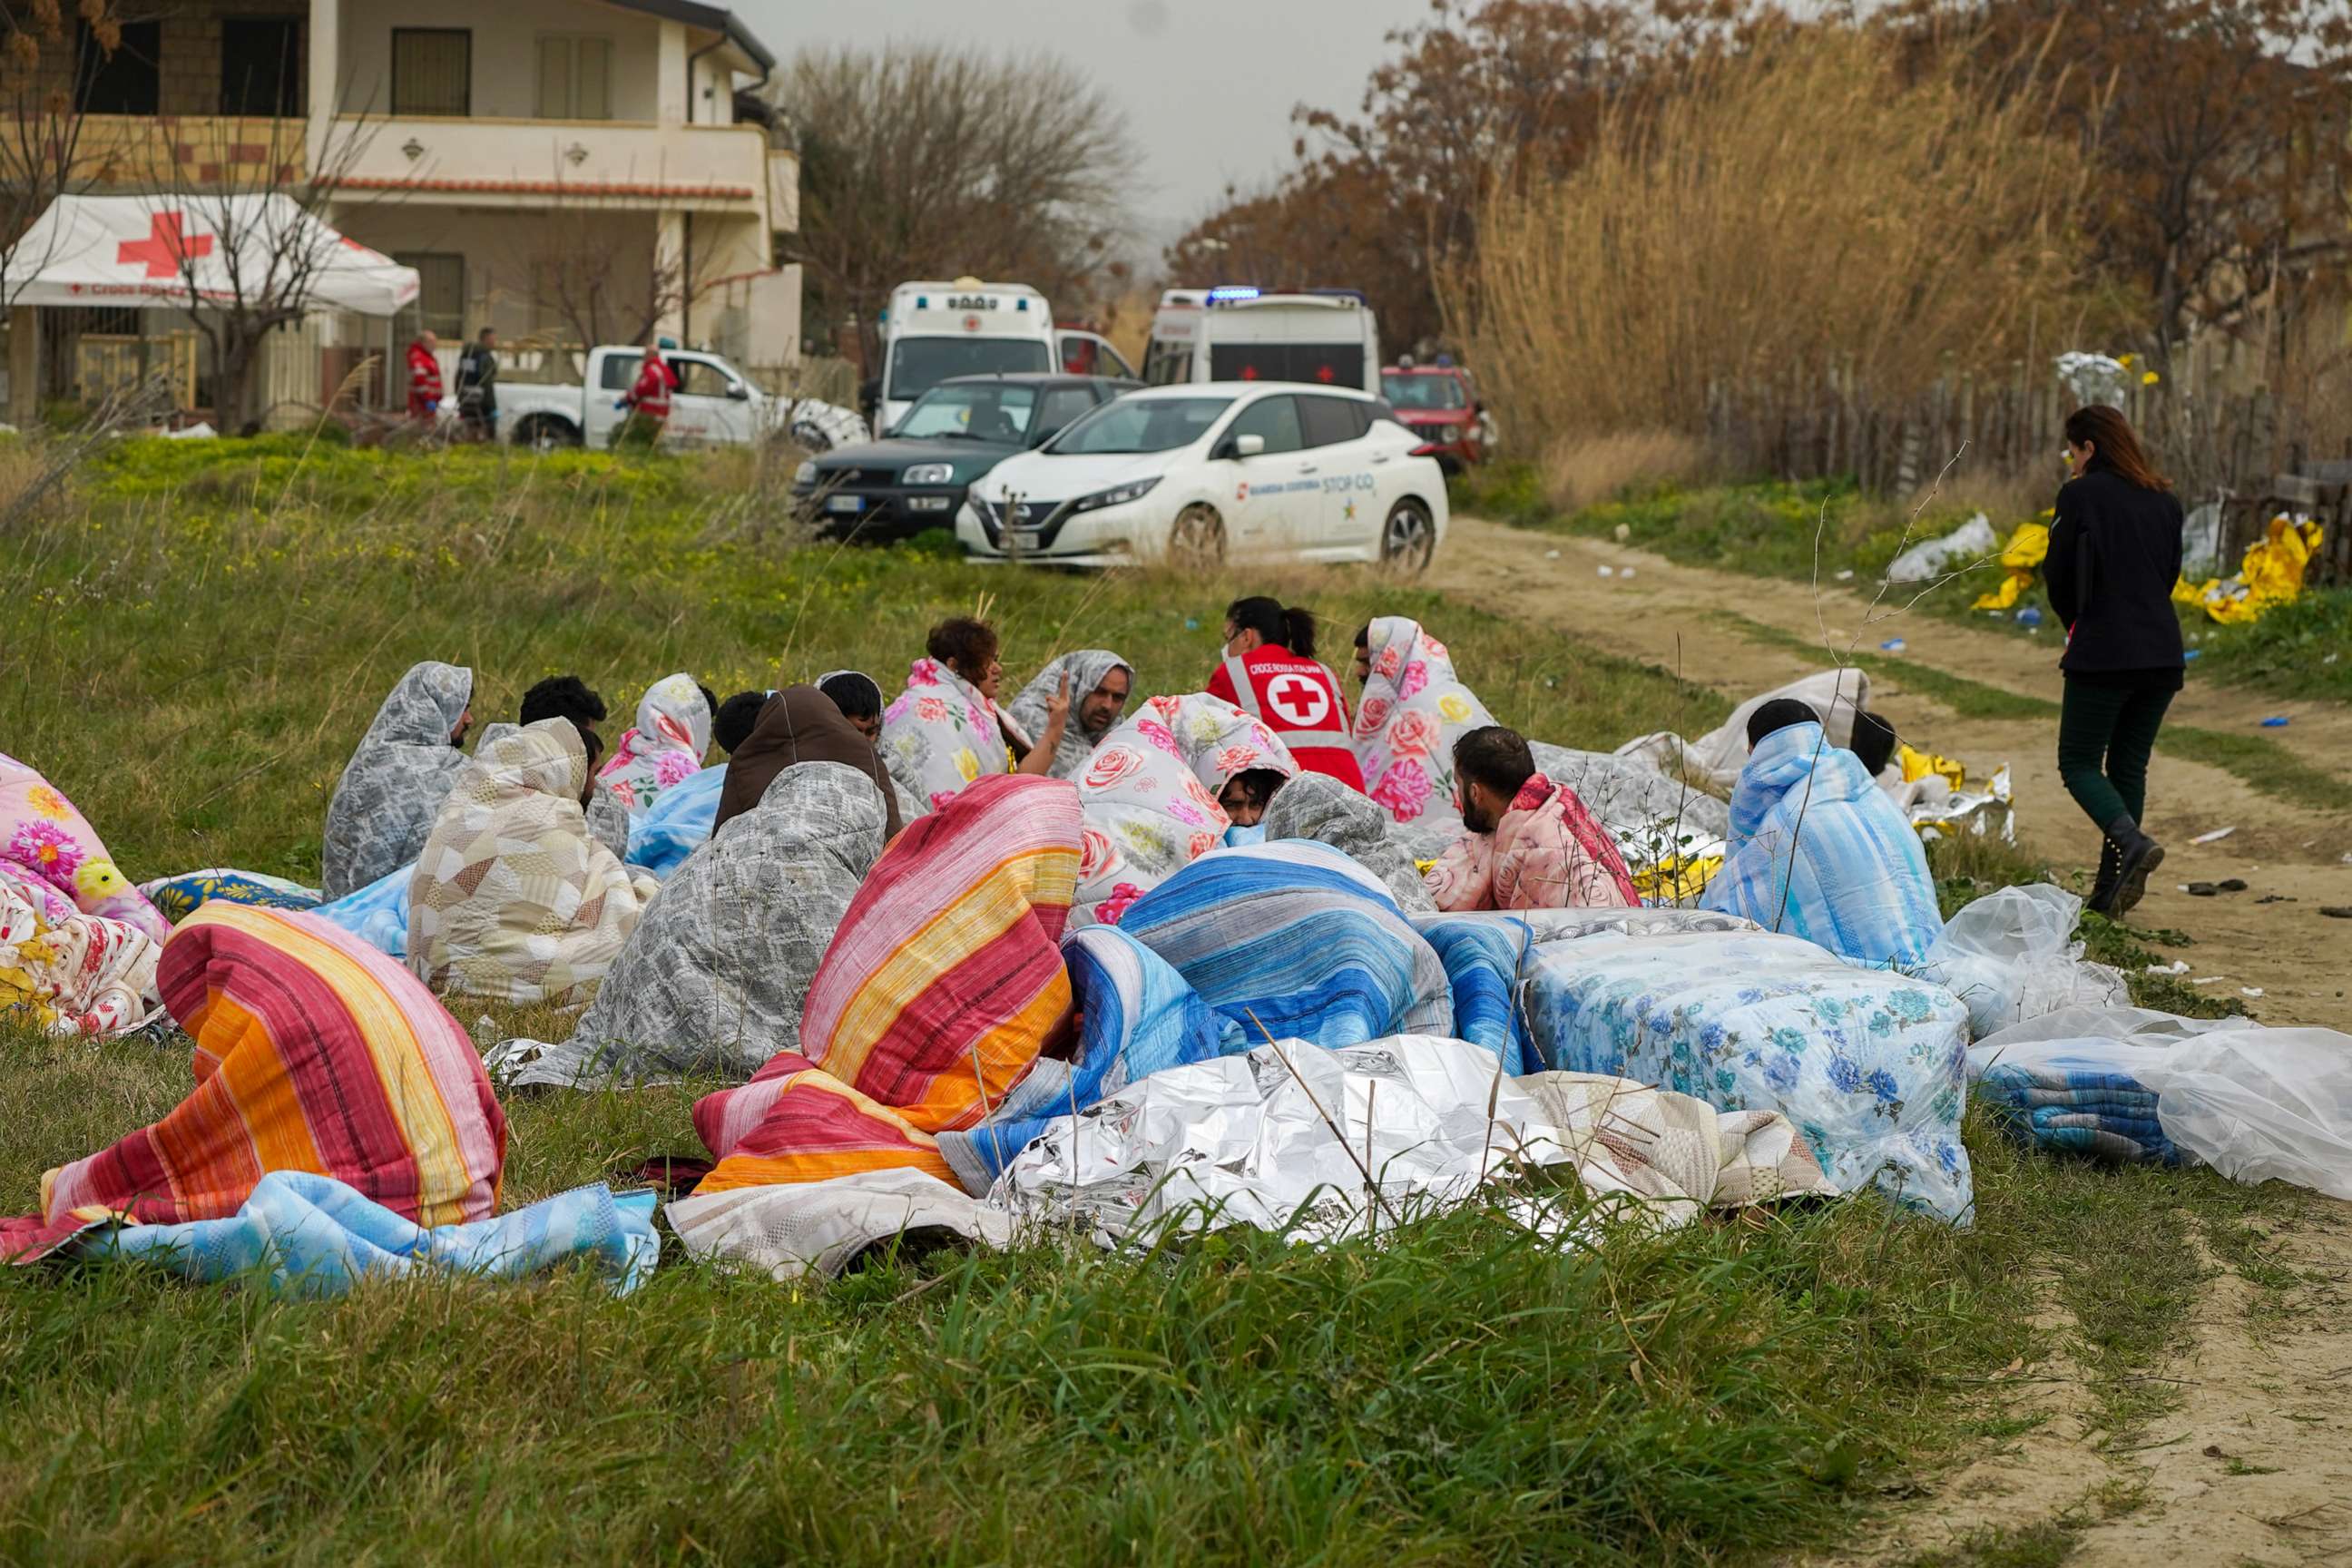 PHOTO: Some migrants who were saved from the shipwreck that occurred on Feb. 26, 2023, were rescued and helped and warmed by blankets in Steccato di Cutro, near Crotone, in Calabria, southern Italy.